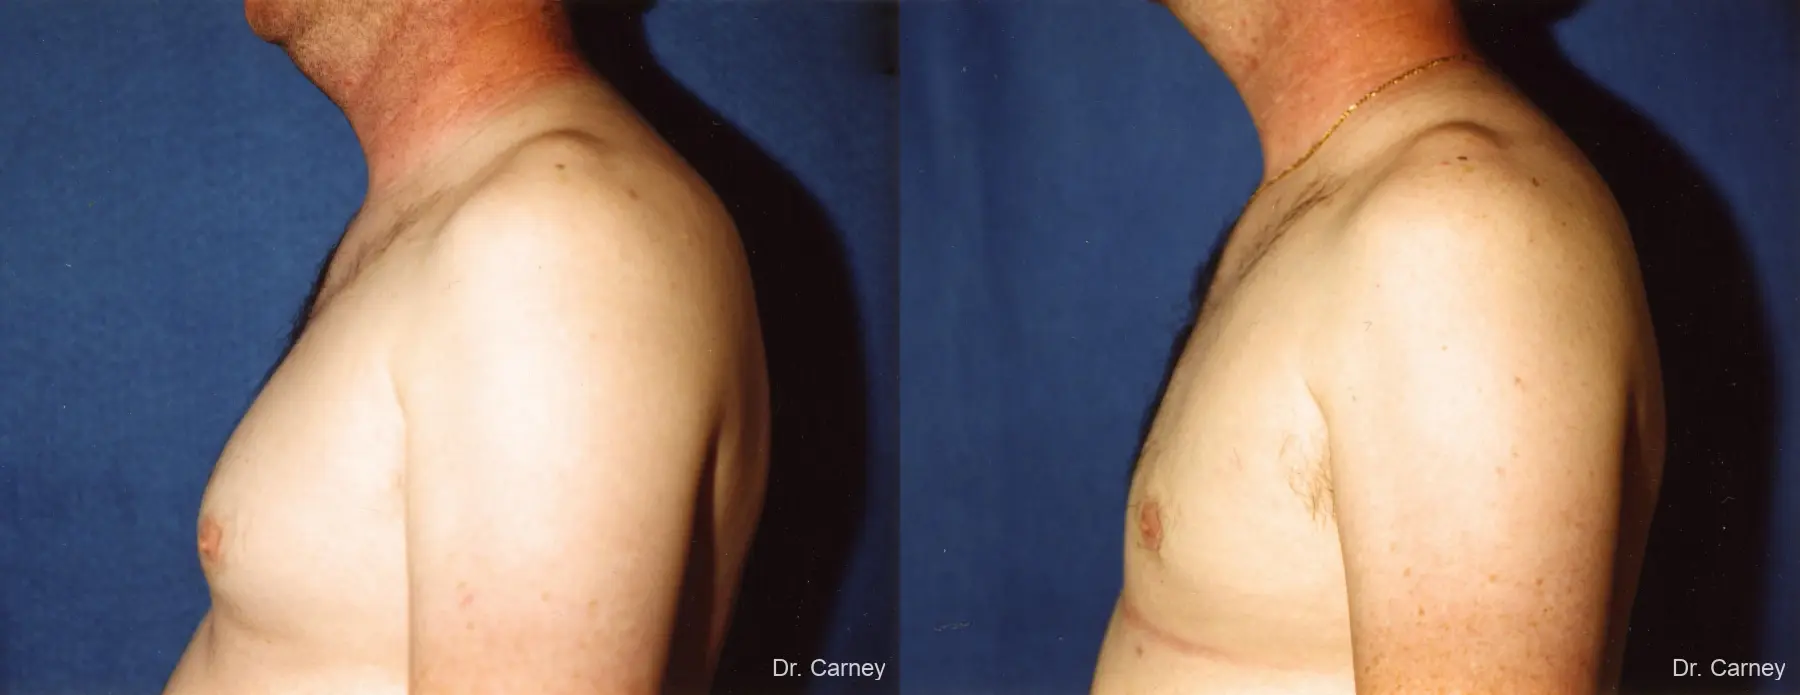 Virginia Beach Gynecomastia 1227 - Before and After 2